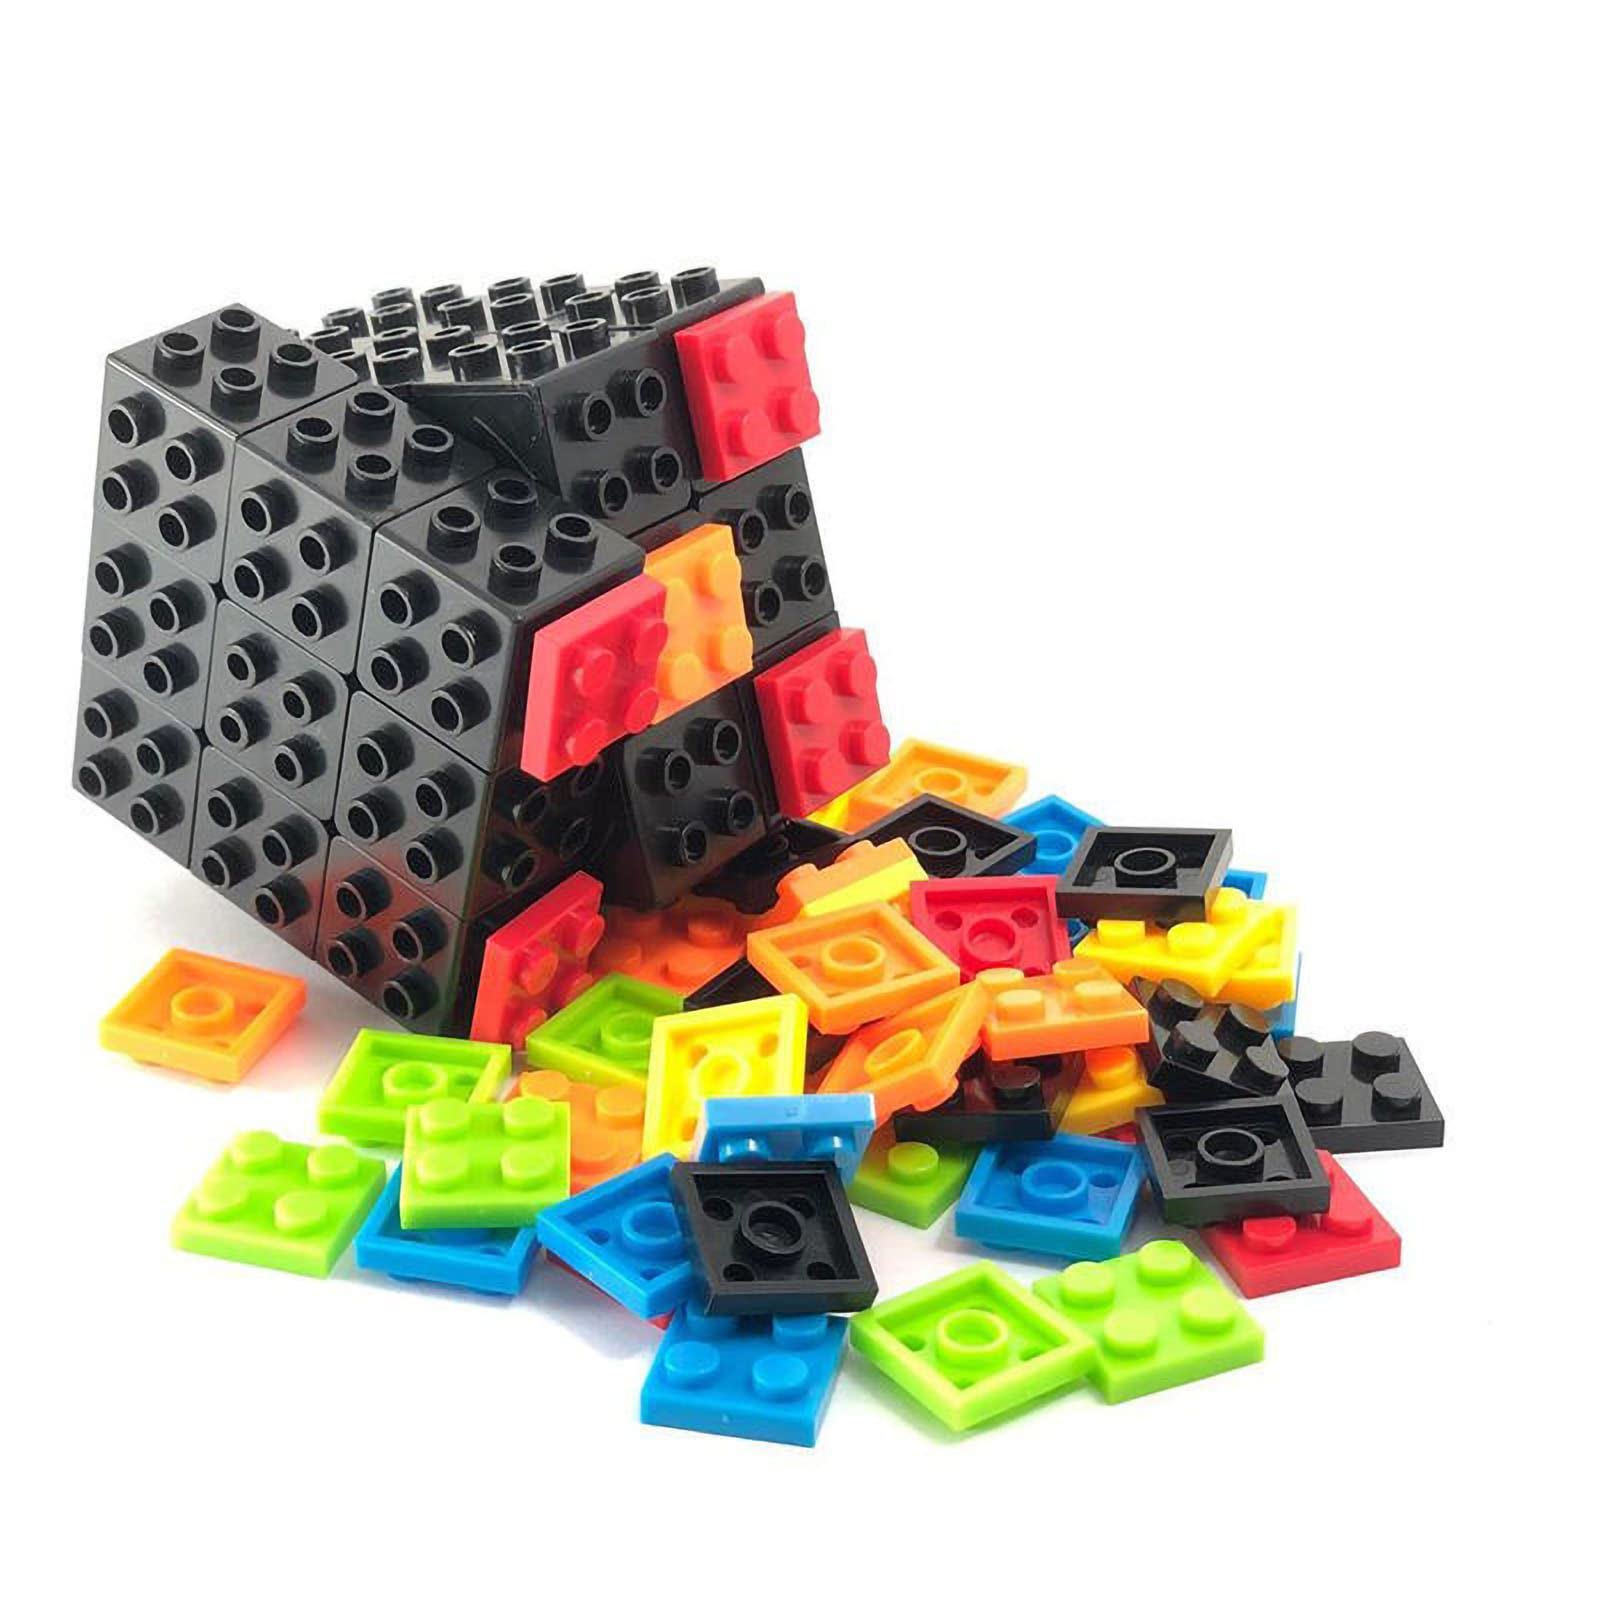 3x3 Speed Cube 3x3x3 Magic Speed Cube Puzzles Black Sturdy and Smooth Speed Cube Puzzles Toy for Children and Adults - amzGamess